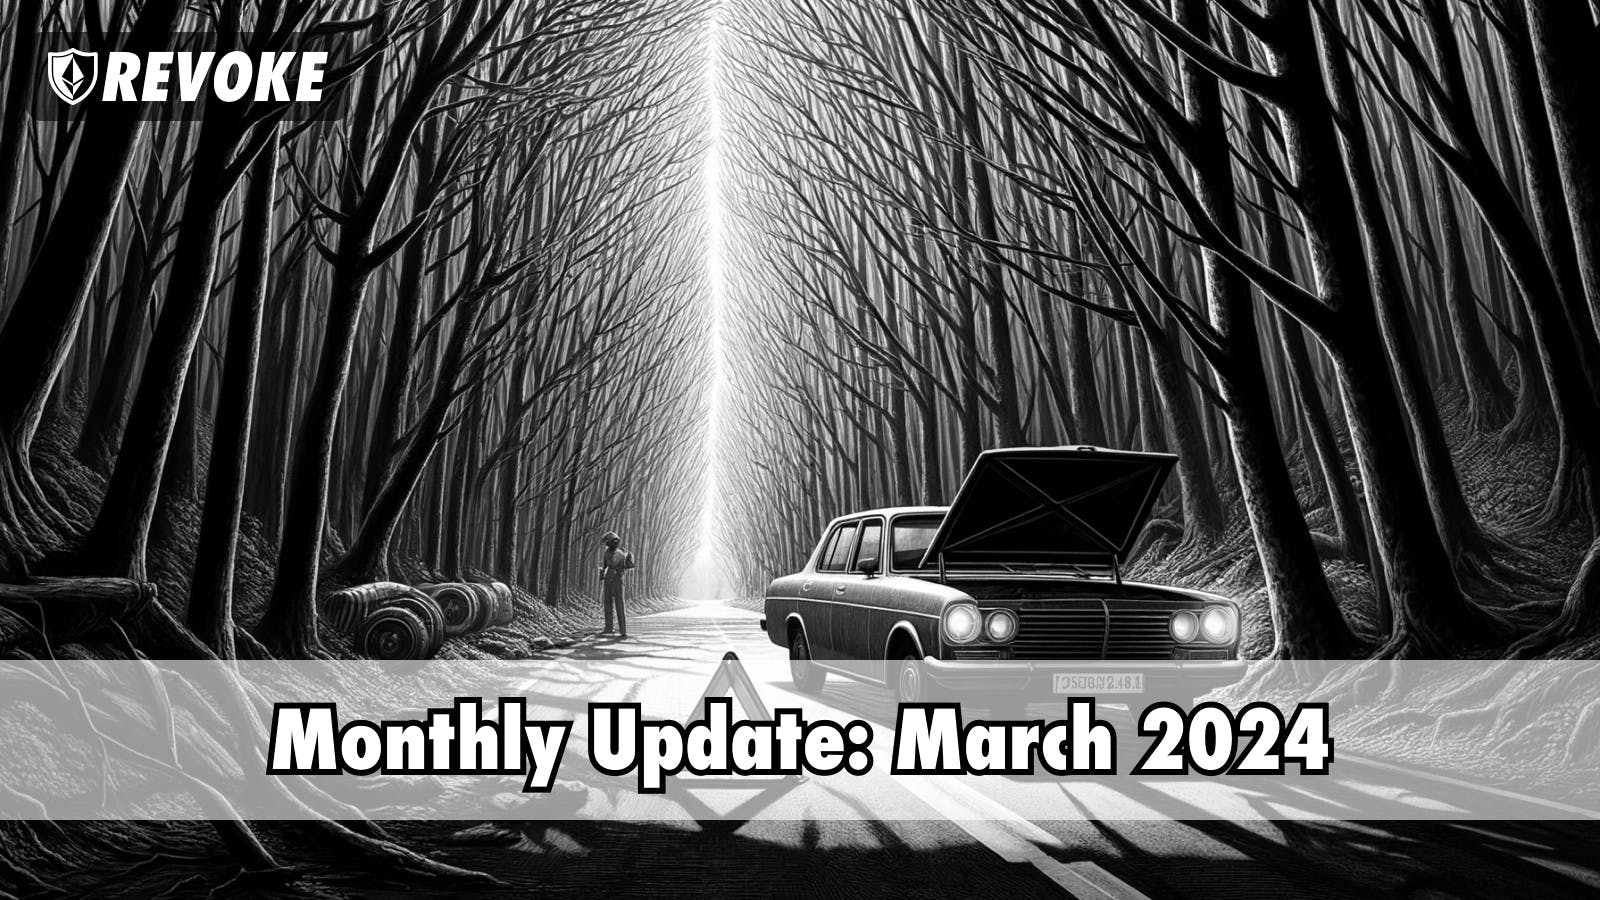 Monthly Update: March 2024